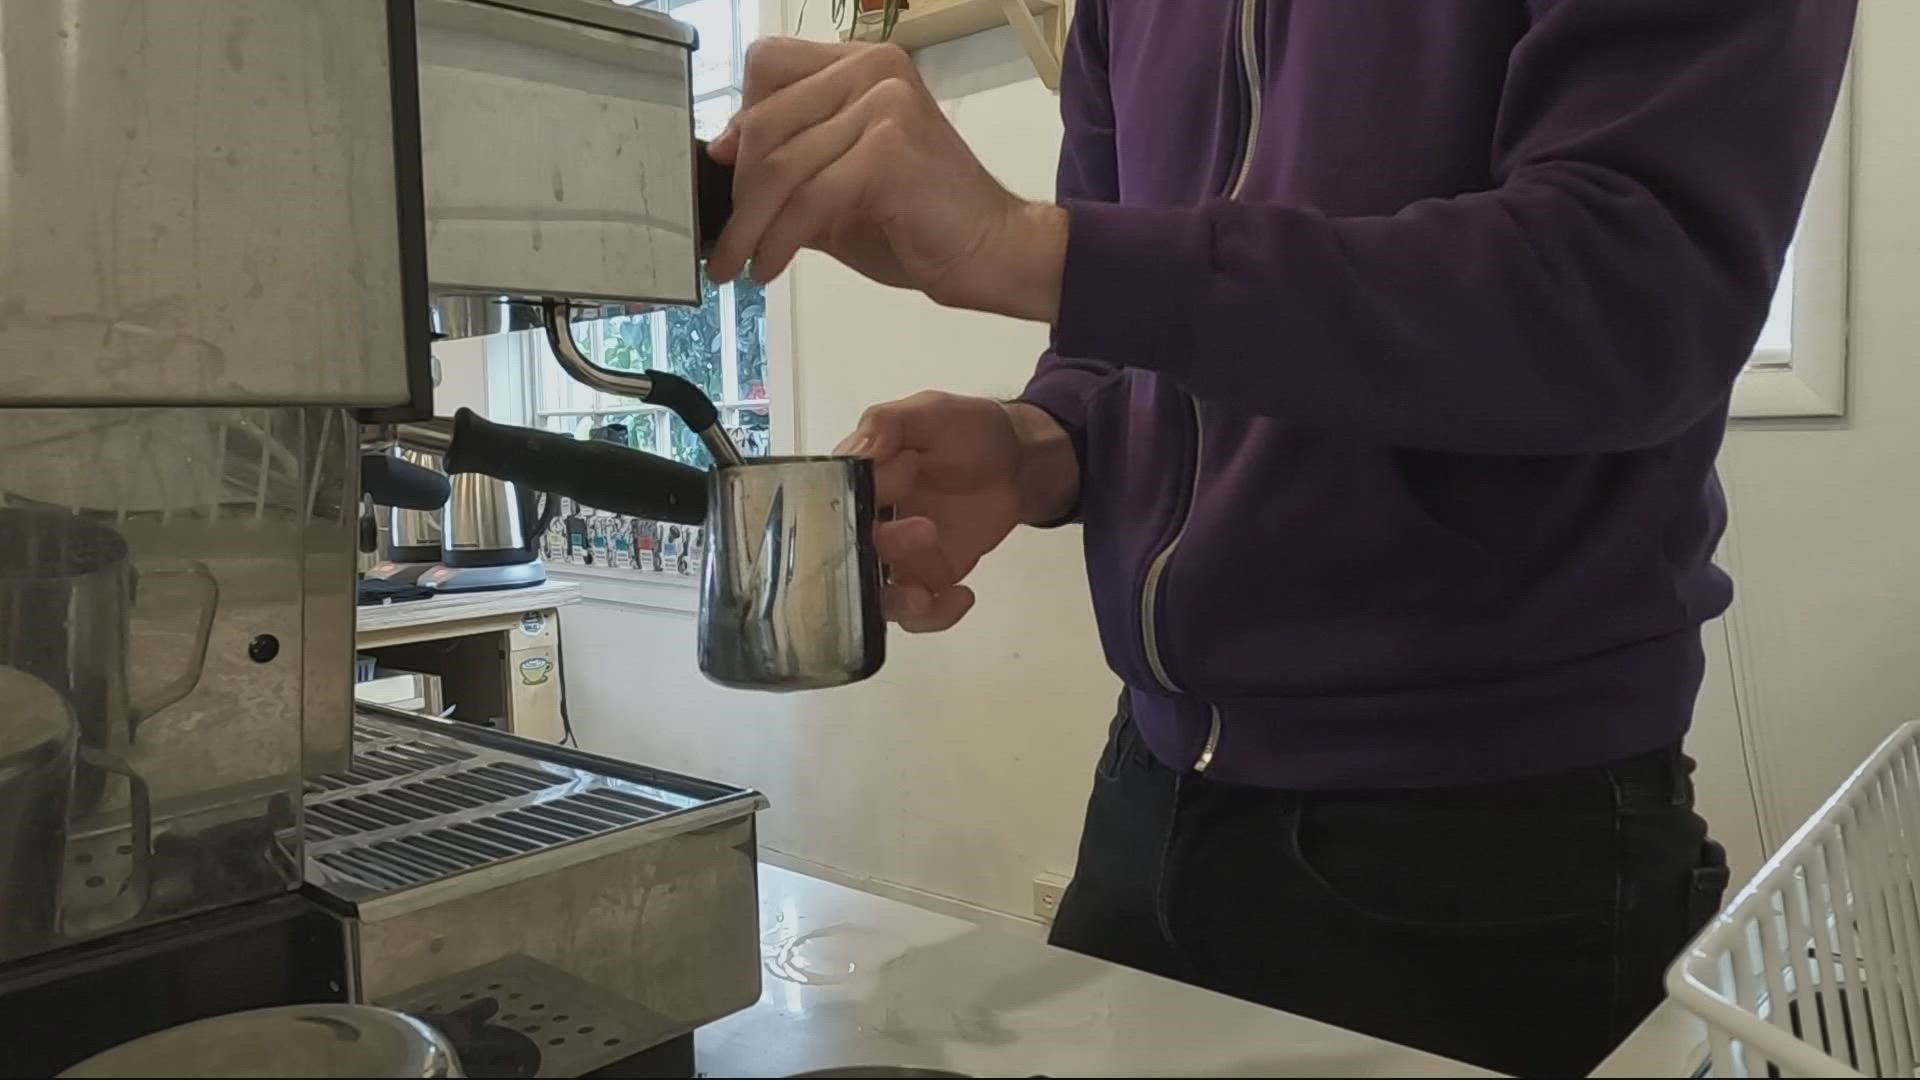 Ardent Coffee operates on a donation-based business model. So far, they’ve raised and donated about $30,000.